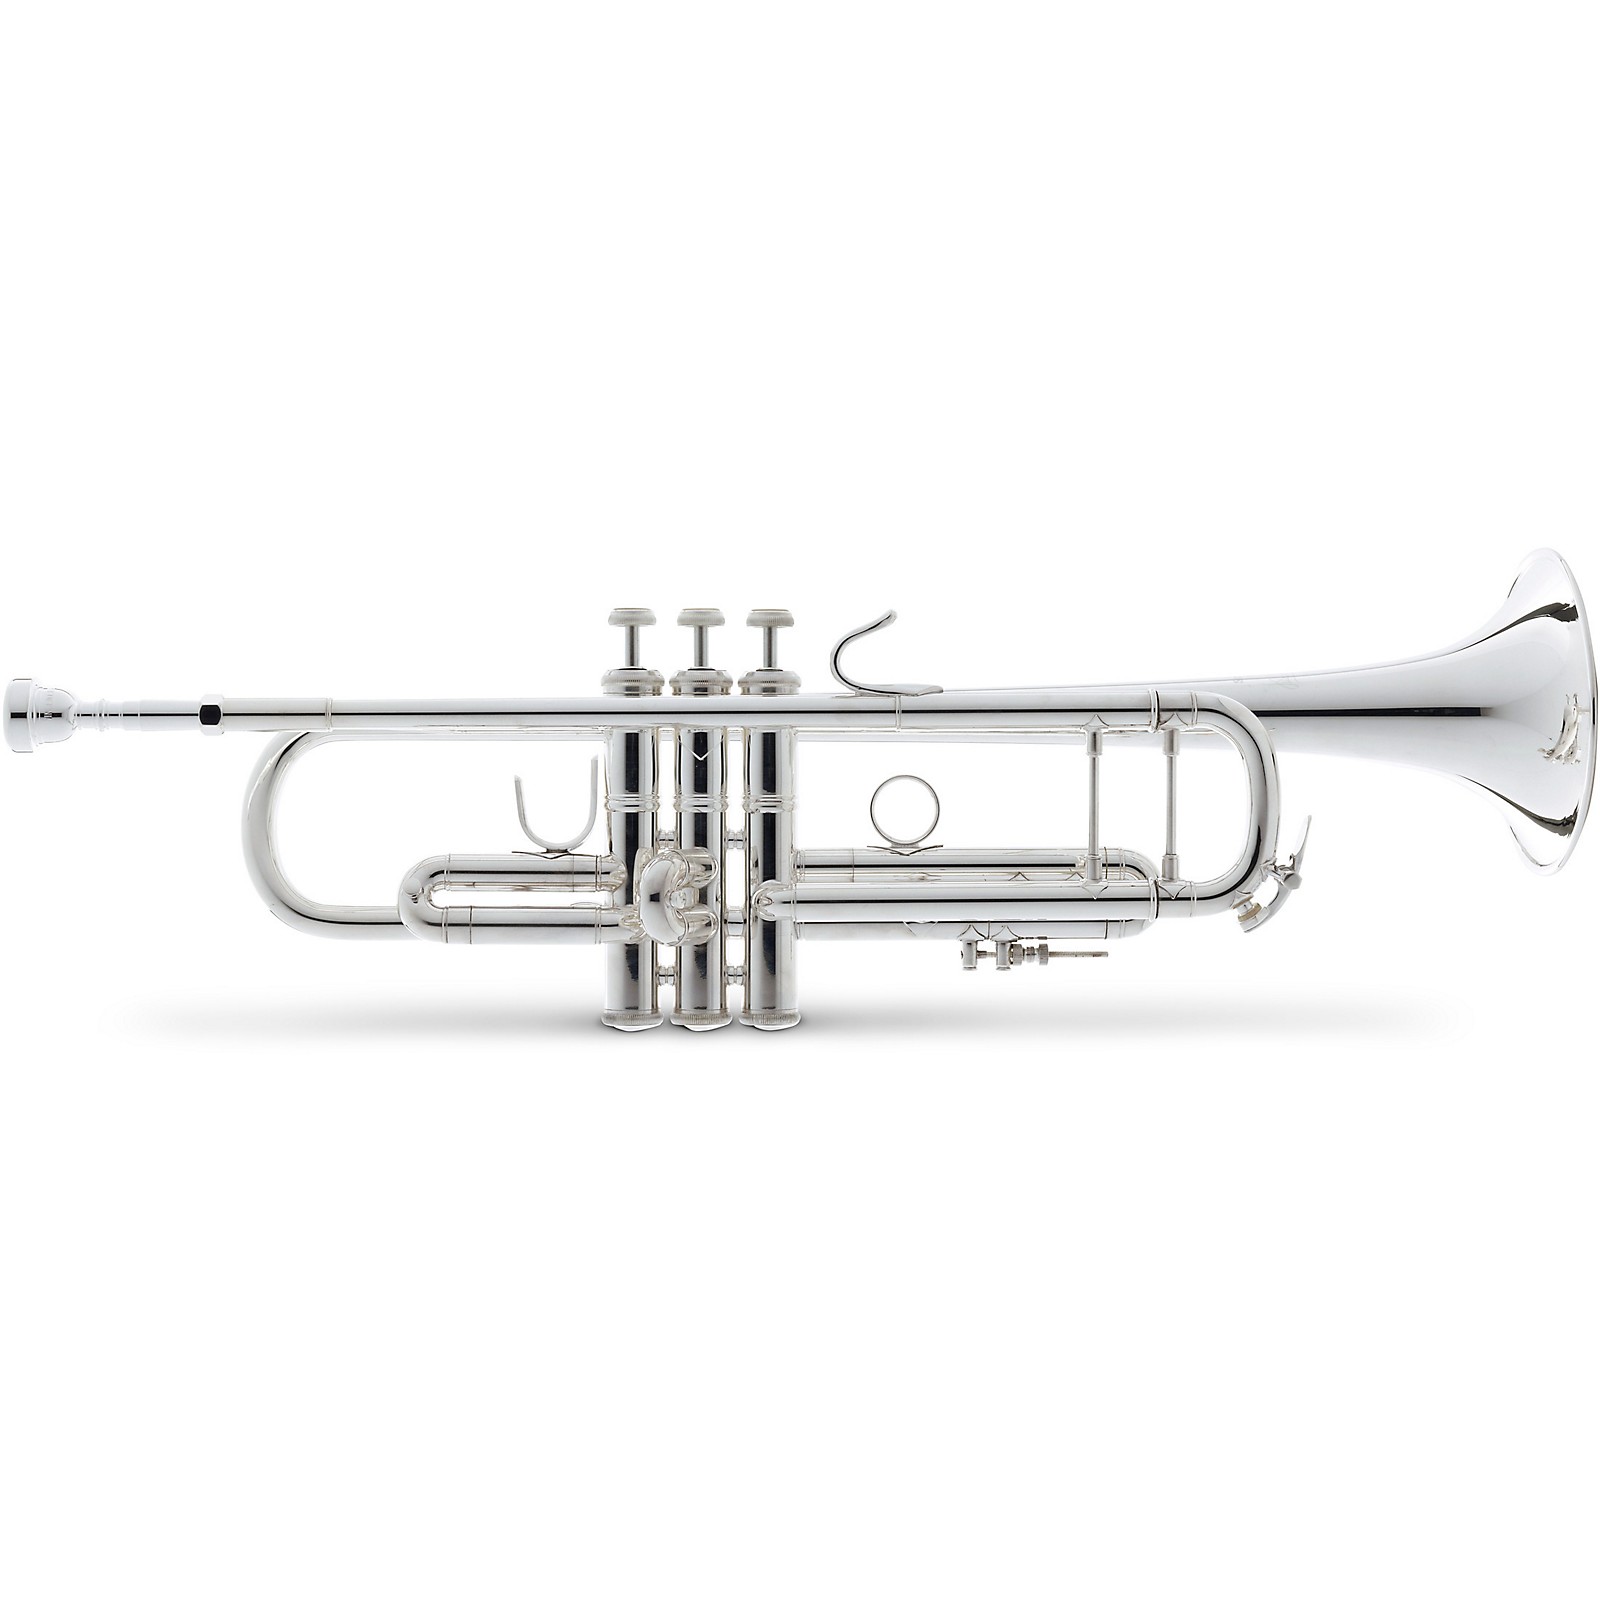 Gold Silver Plated Bb Professional Trumpet with Mouthpiece and Case Wind  Musical Instrument Brass Instrument : : Musical Instruments, Stage  & Studio